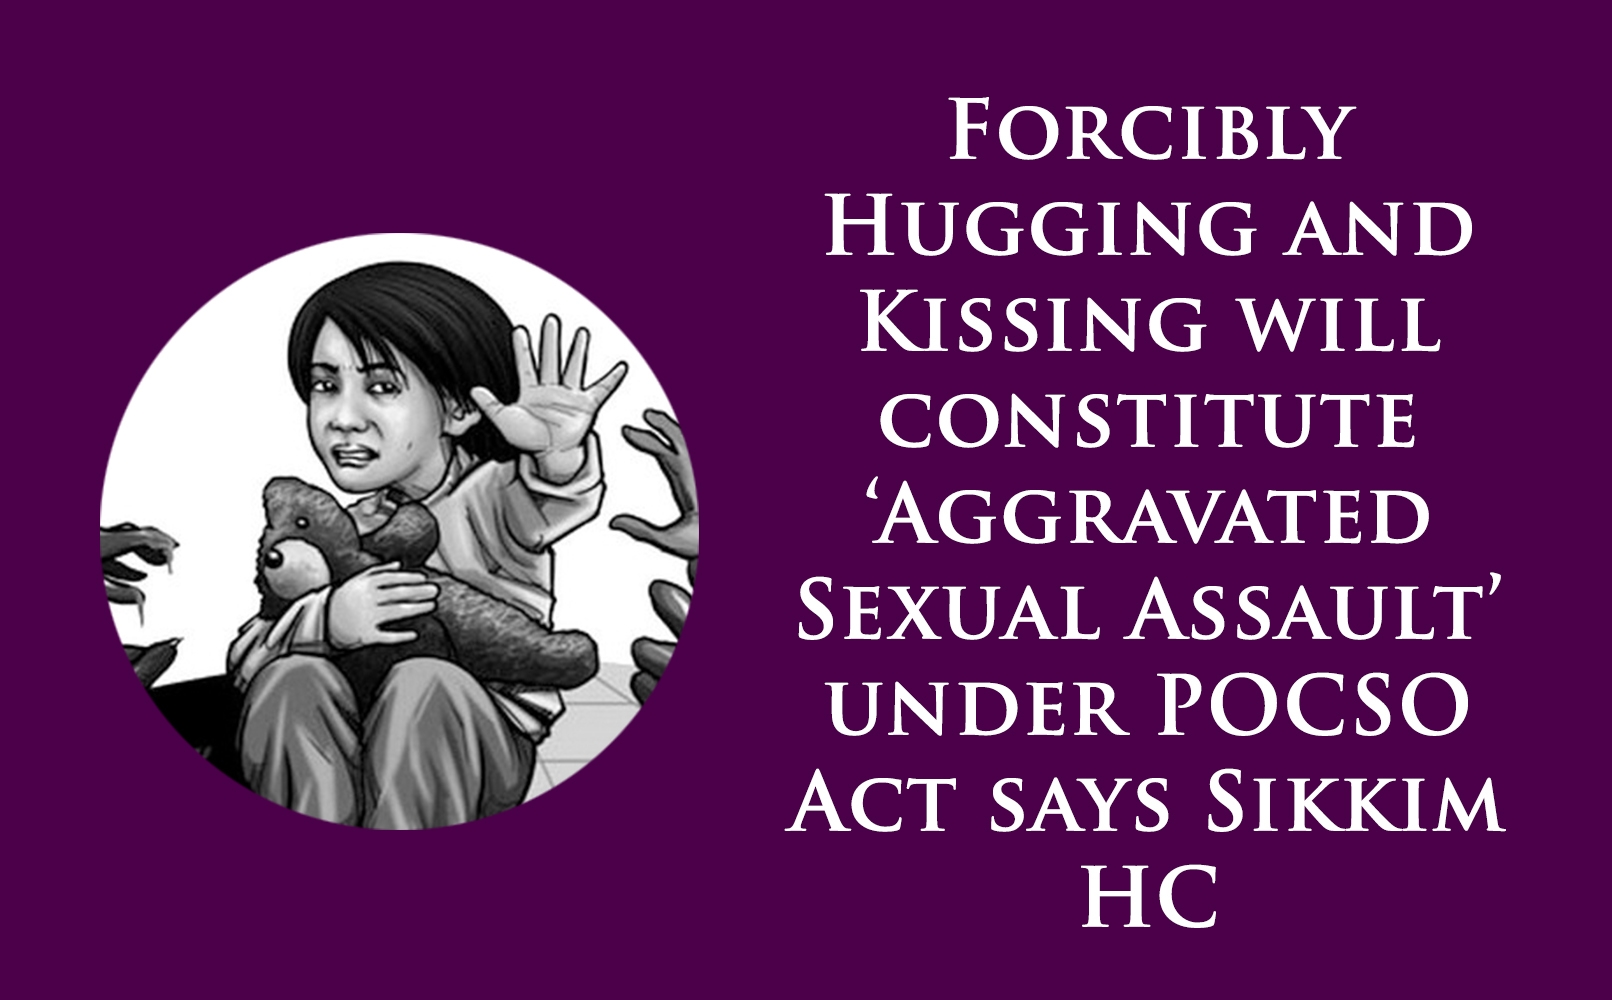 Forcibly Hugging and Kissing will constitute 'Aggravated Sexual Assault' under POCSO Act says Sikkim HC | Law Corner